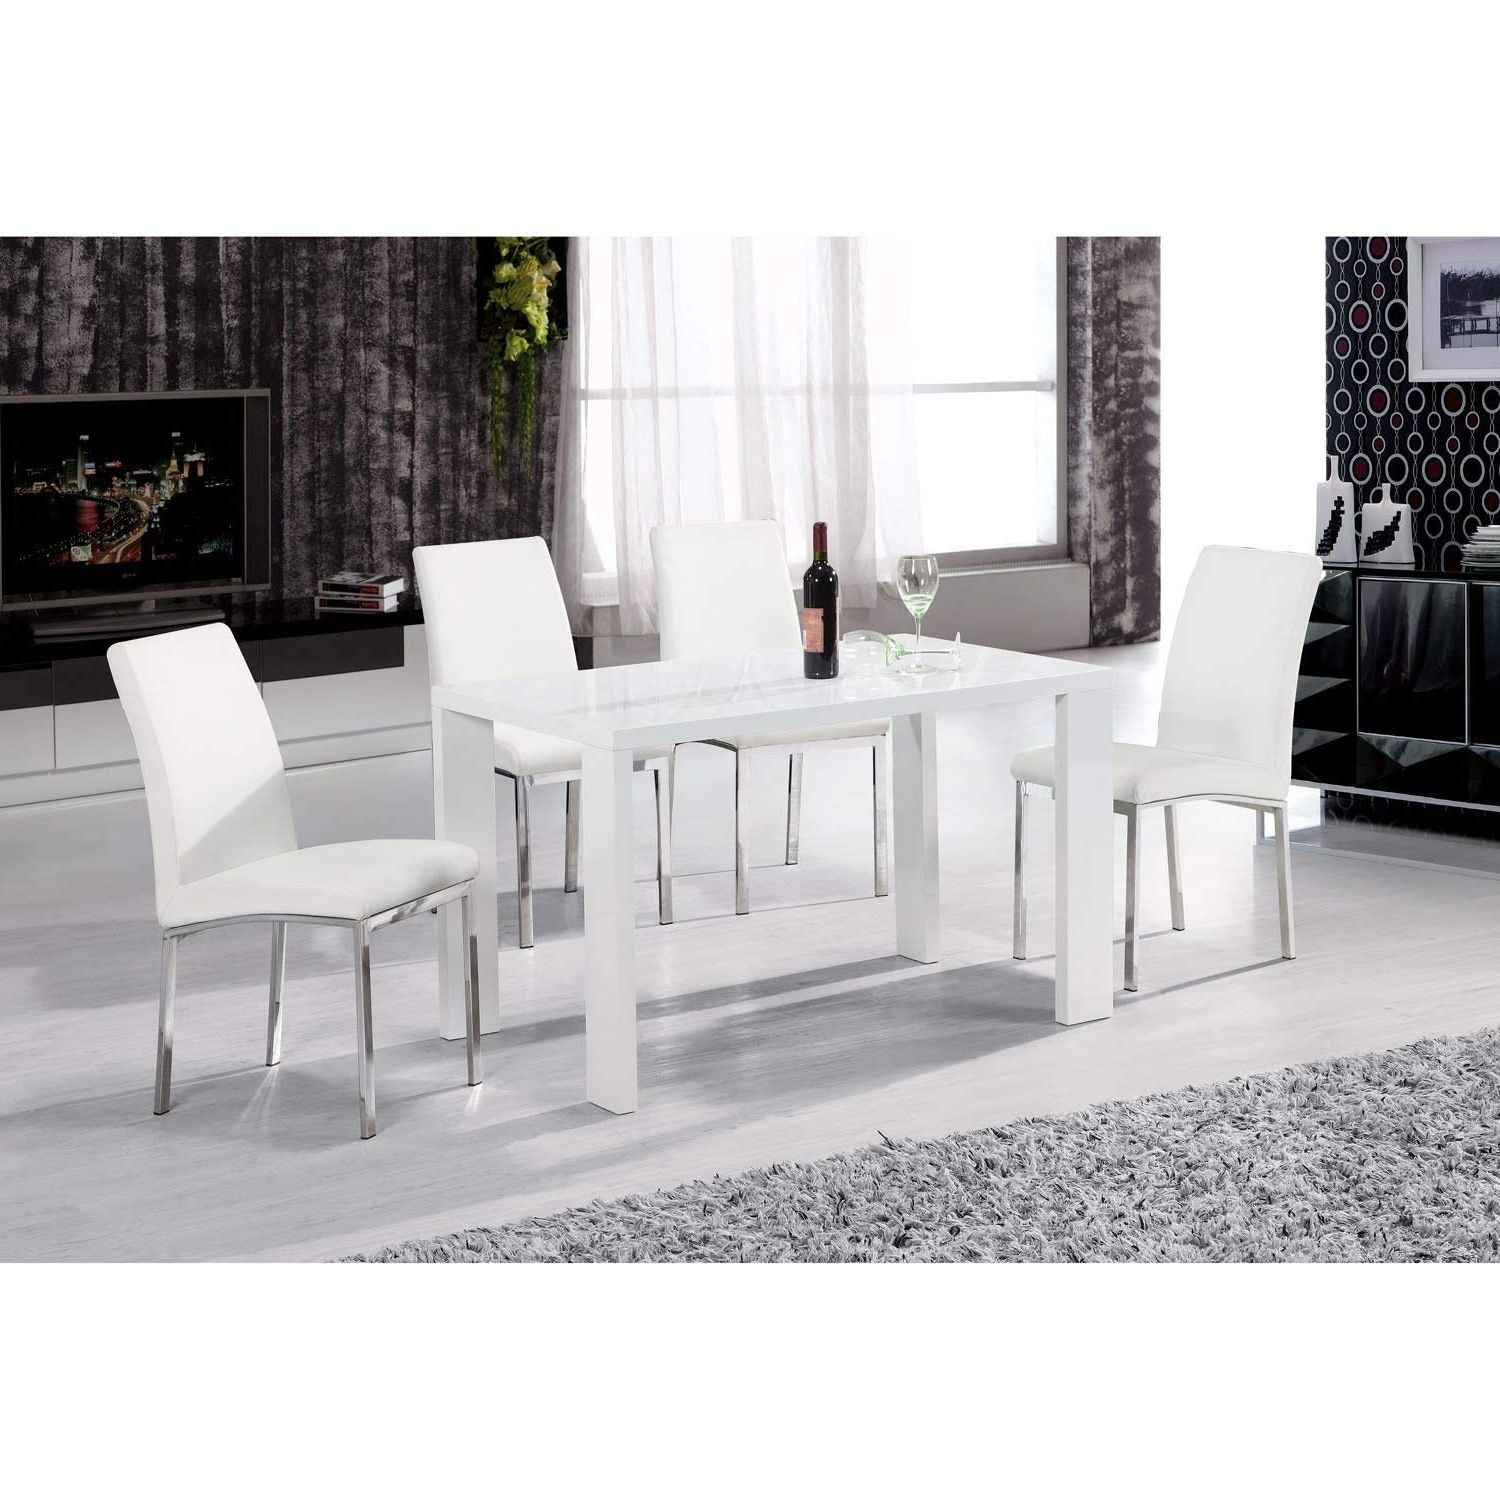 White Gloss Dining Tables With Regard To Fashionable Heartlands Peru White High Gloss 130cm Dining Table In Wood (View 21 of 25)